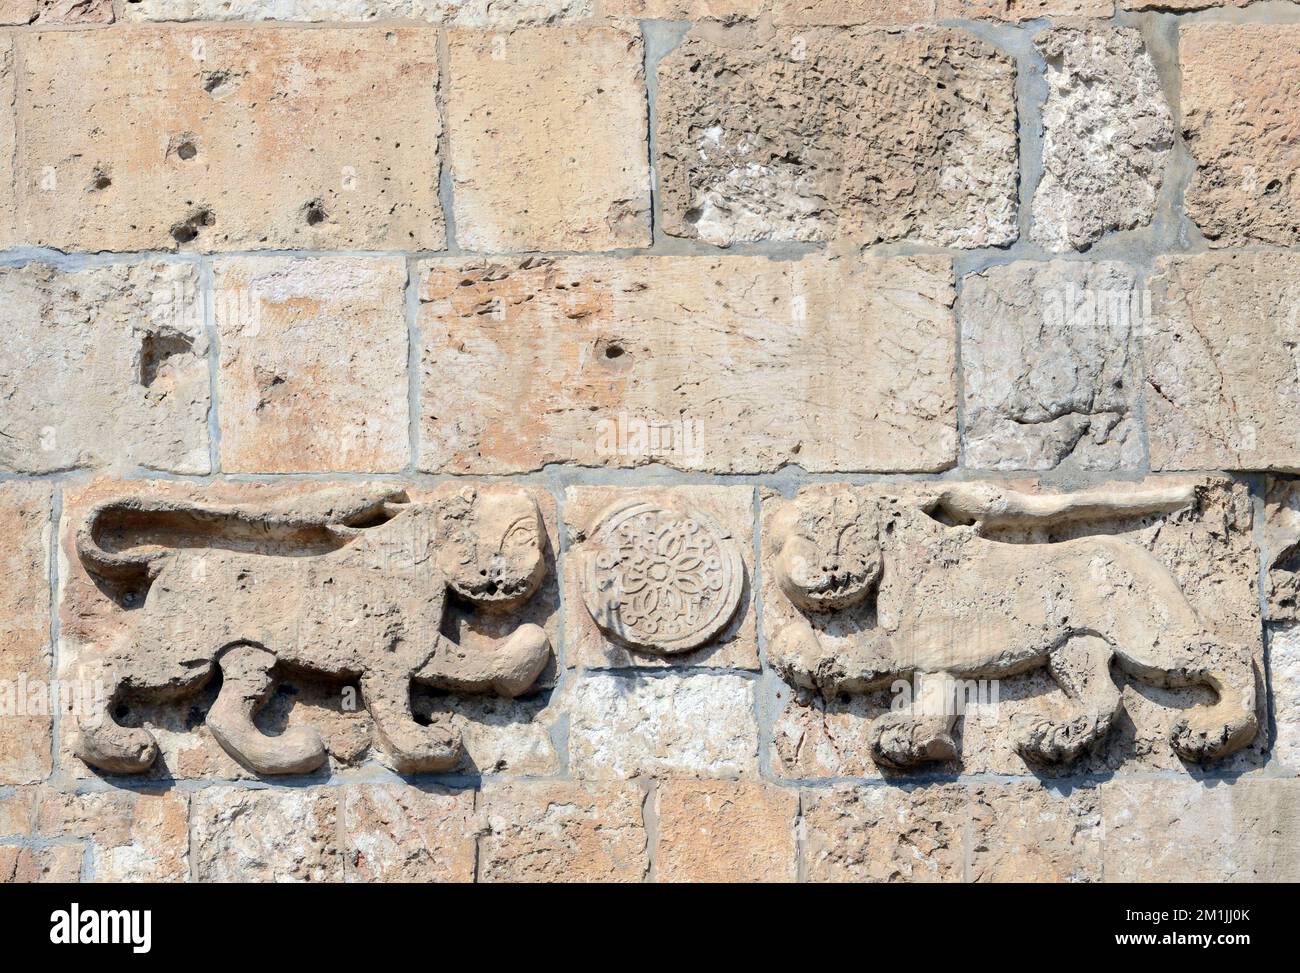 Lions reliefs at the Lion's Gate in the old city of Jerusalem. Stock Photo